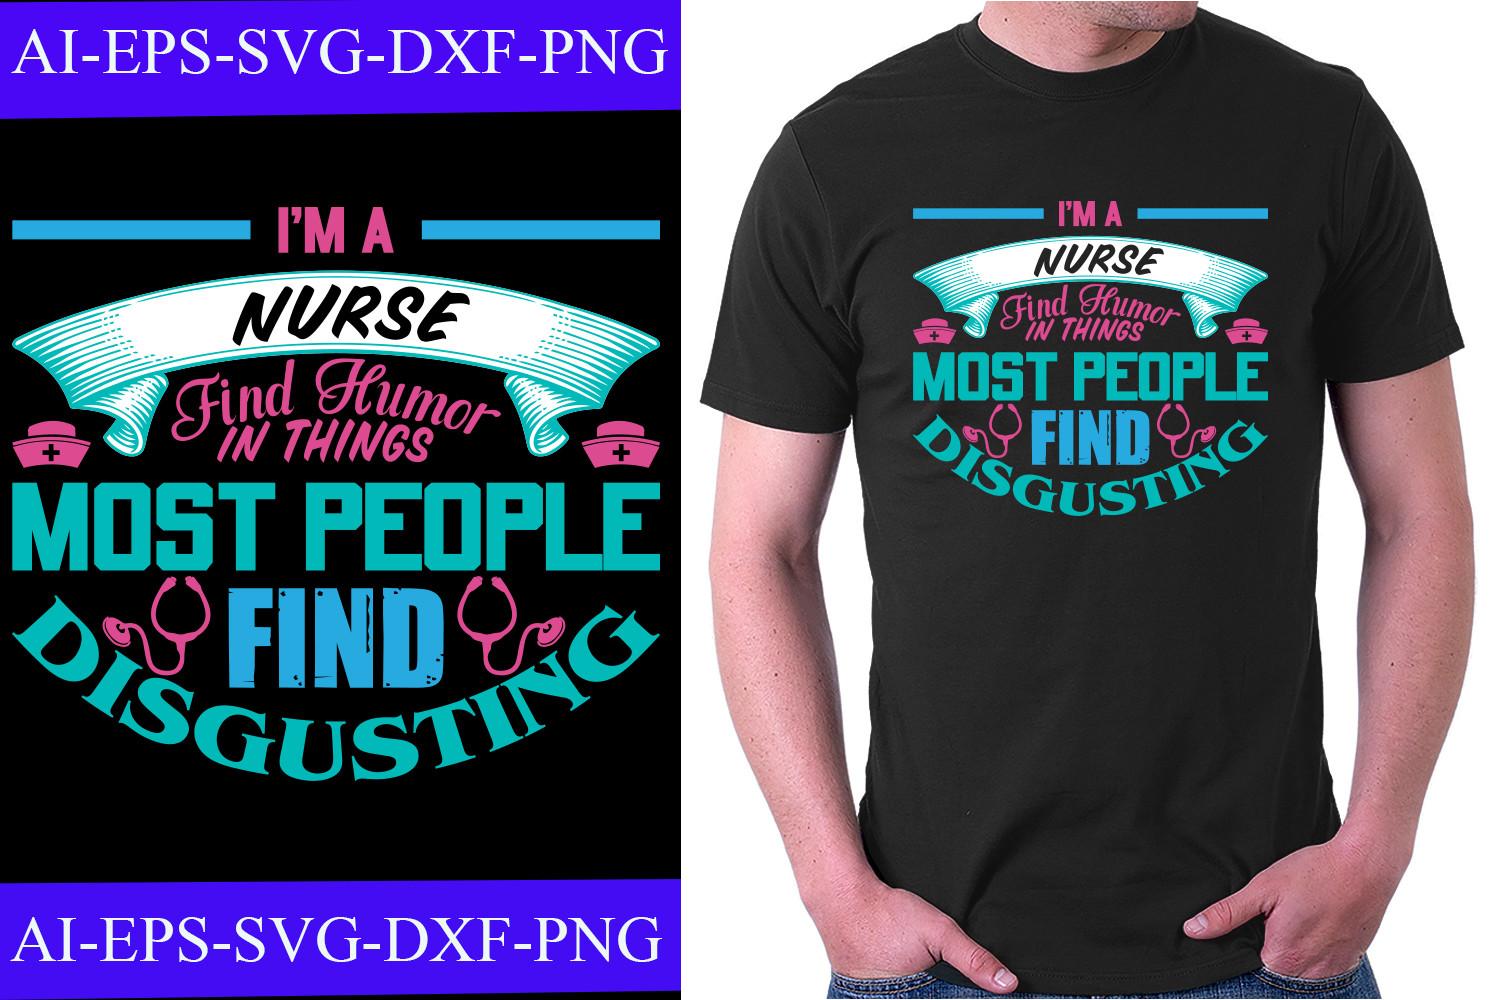 I'm a Nurse Find Humor in Things T-shirt